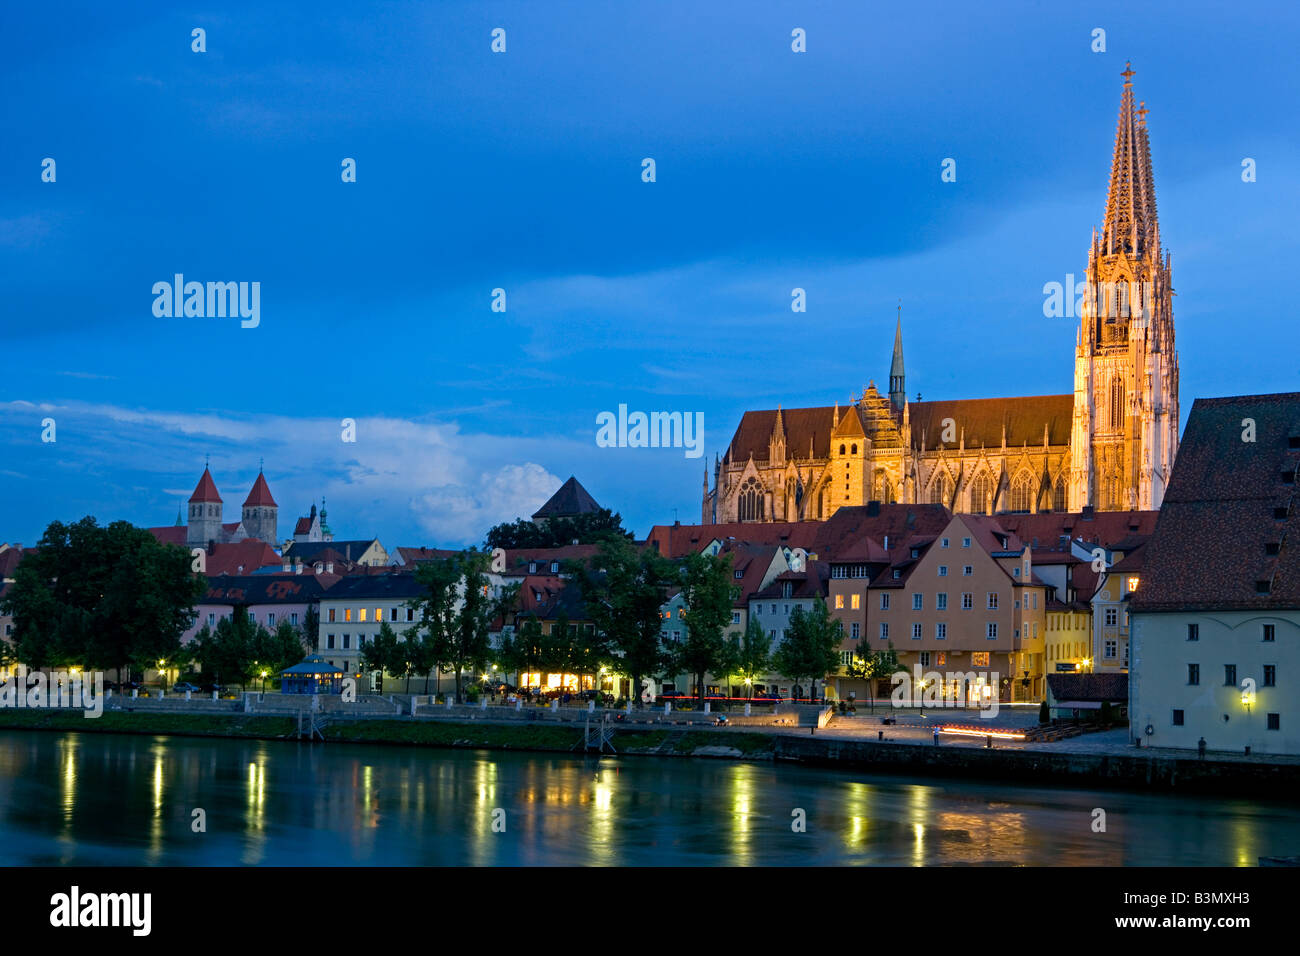 Deutschland, Bayern, Regensburger Dom bei Nacht, Danube river and Saint Peters cathedral, Regensburg, Germany Stock Photo